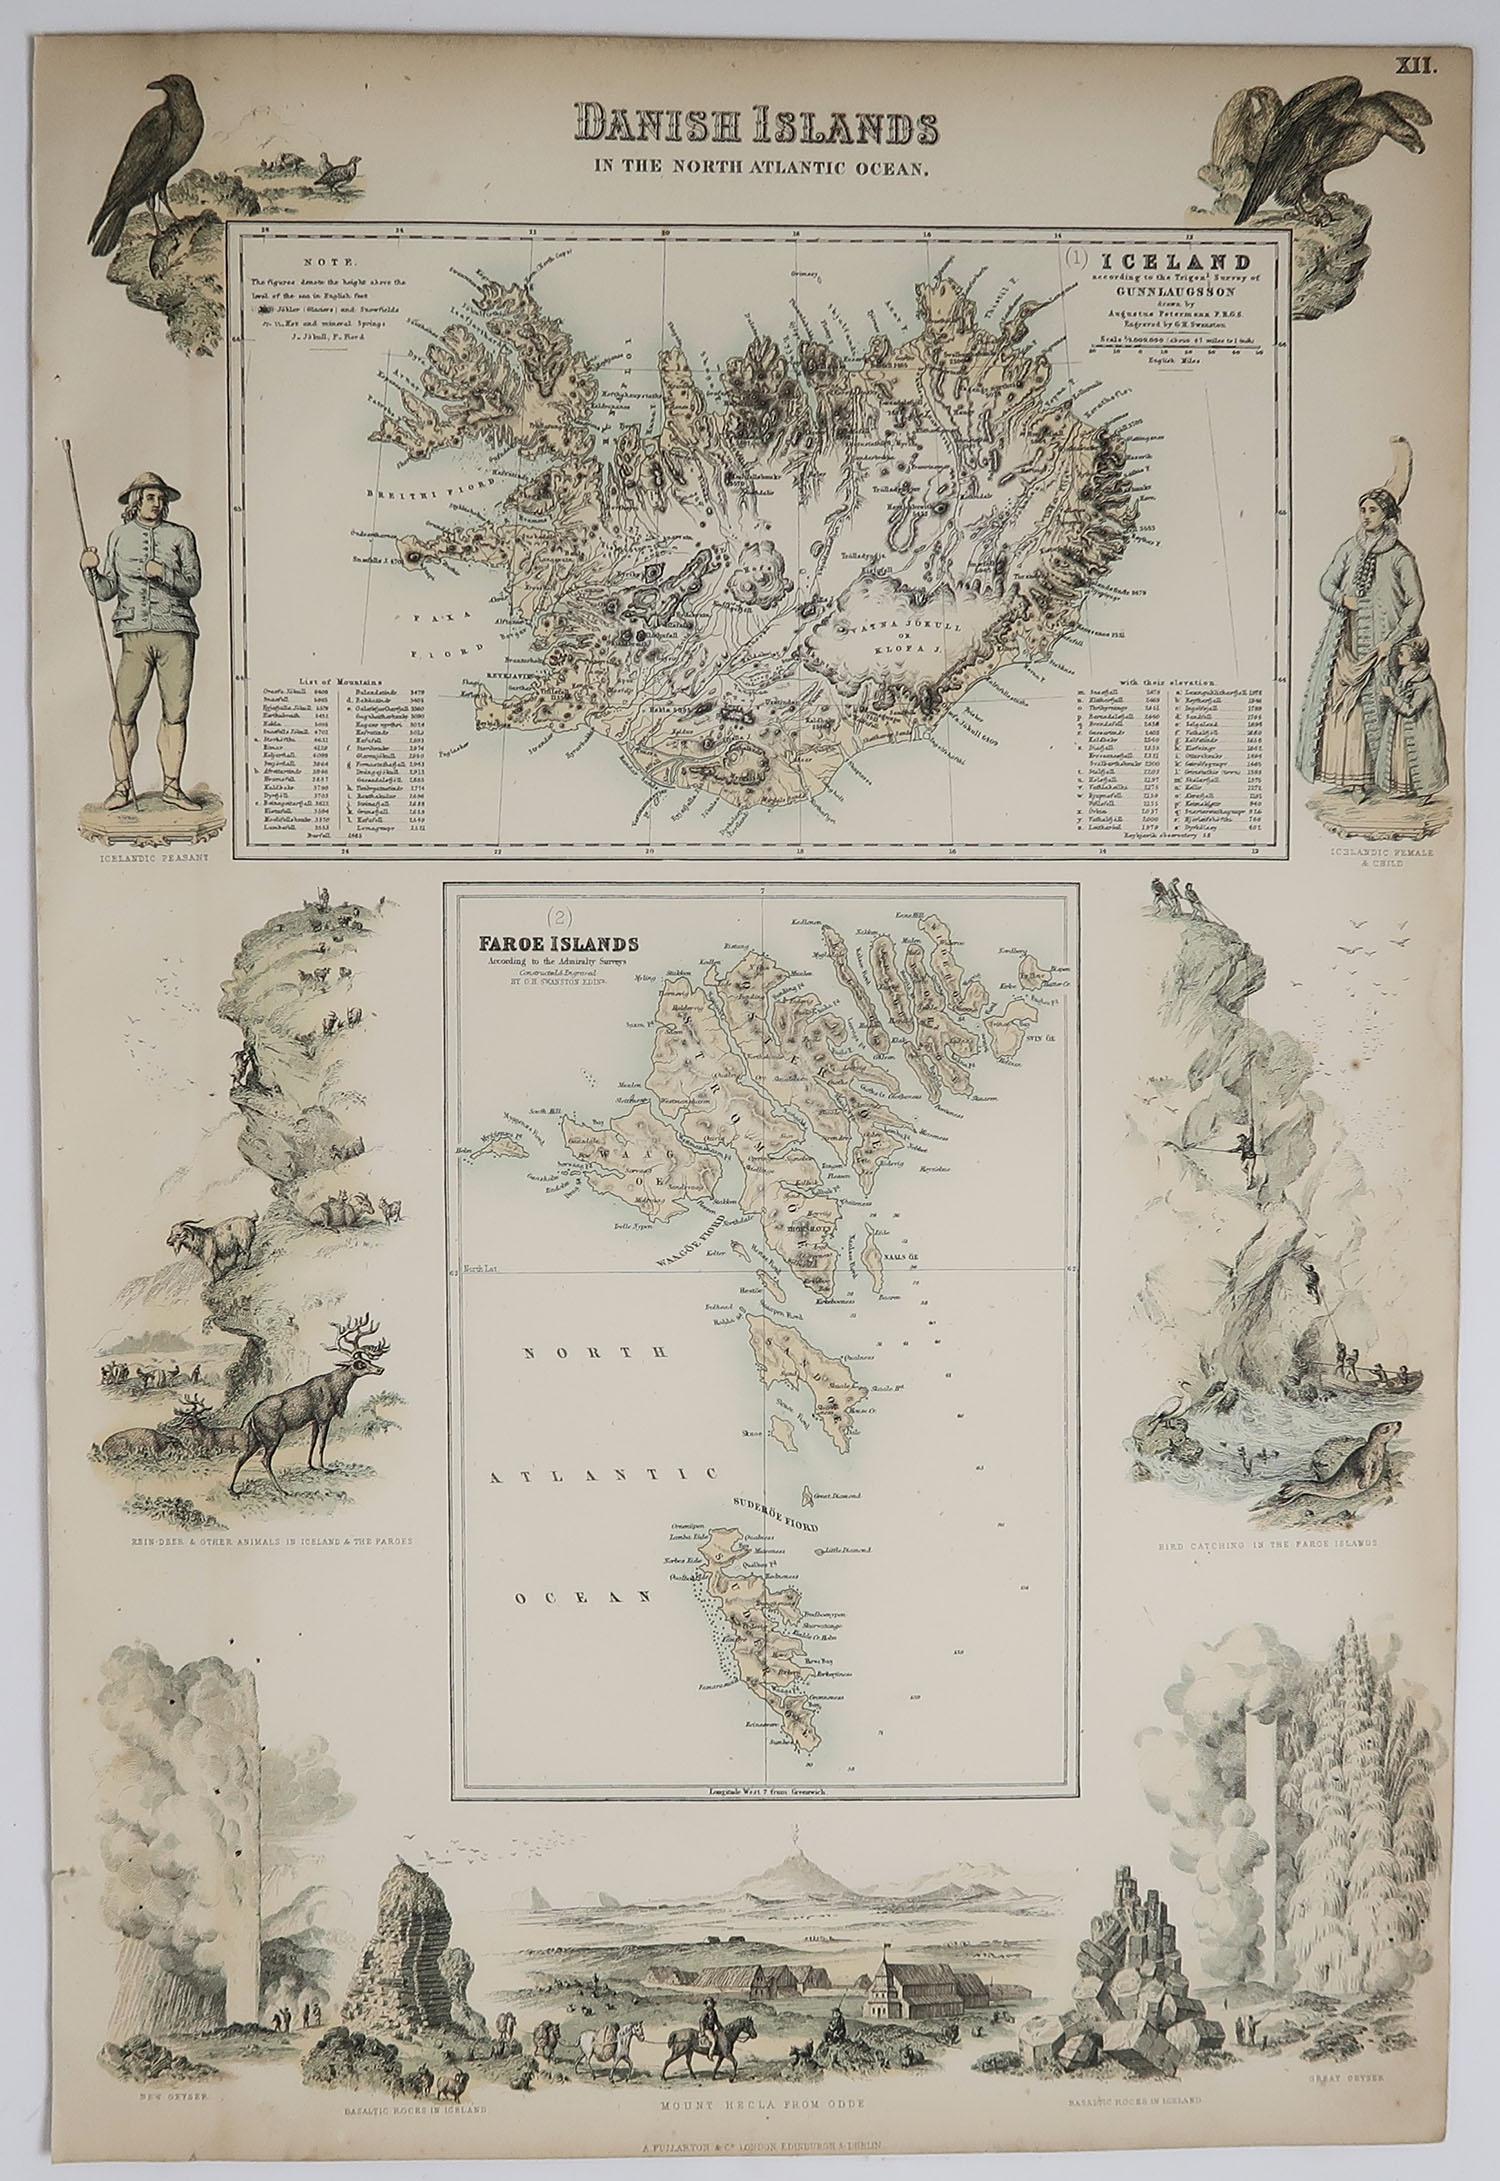 Great map of Iceland and The Faroe Islands

Wonderful figural border

From the celebrated Royal Illustrated Atlas

Lithograph. Original color. 

Published by Fullarton, Edinburgh, C.1870

Unframed.










